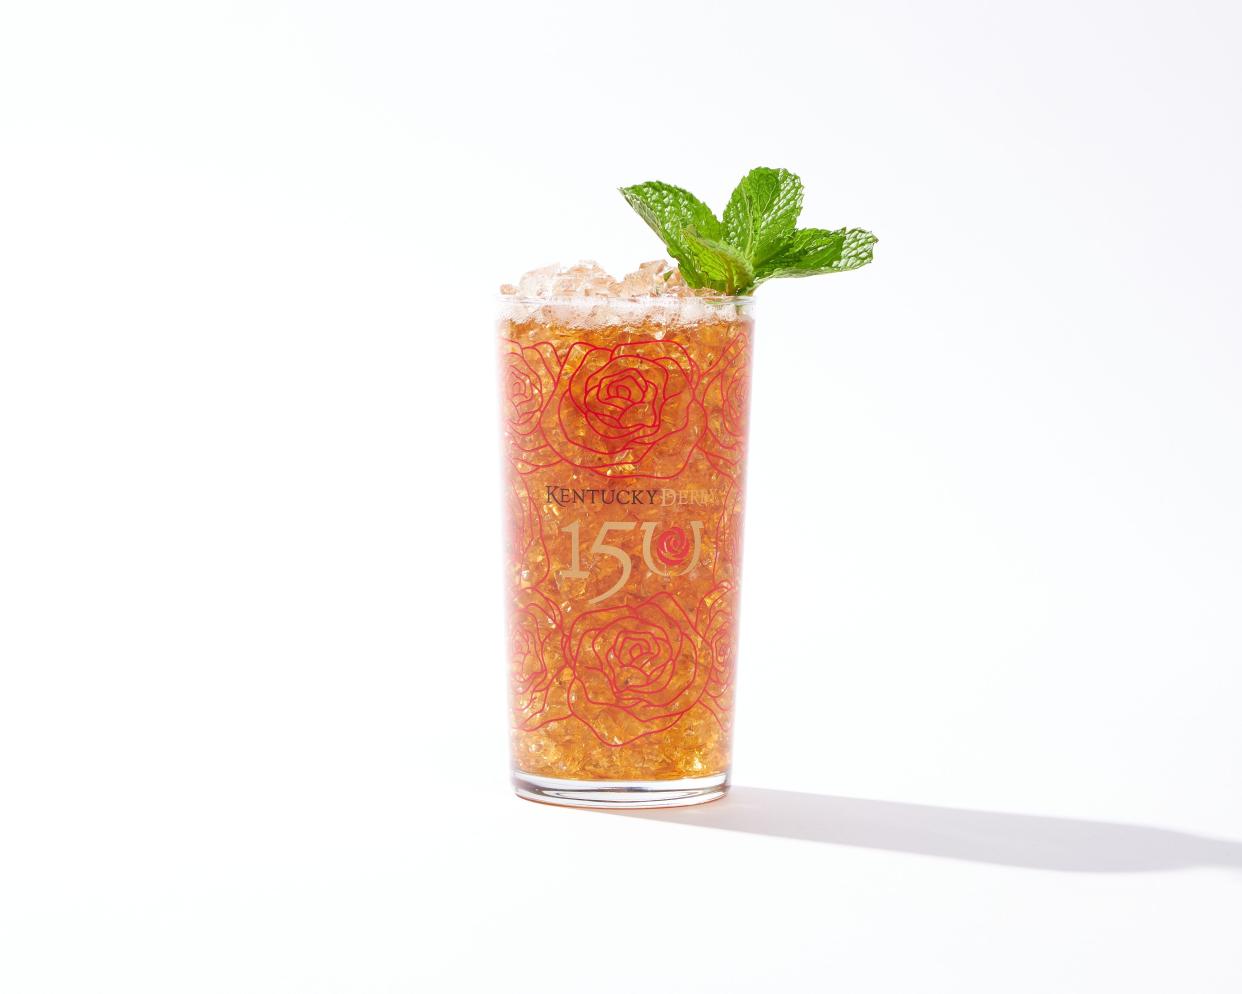 The Kentucky Derby 150 official menu features the Old Forester Mint Julep, made with simple syrup, fresh mint and crushed ice.